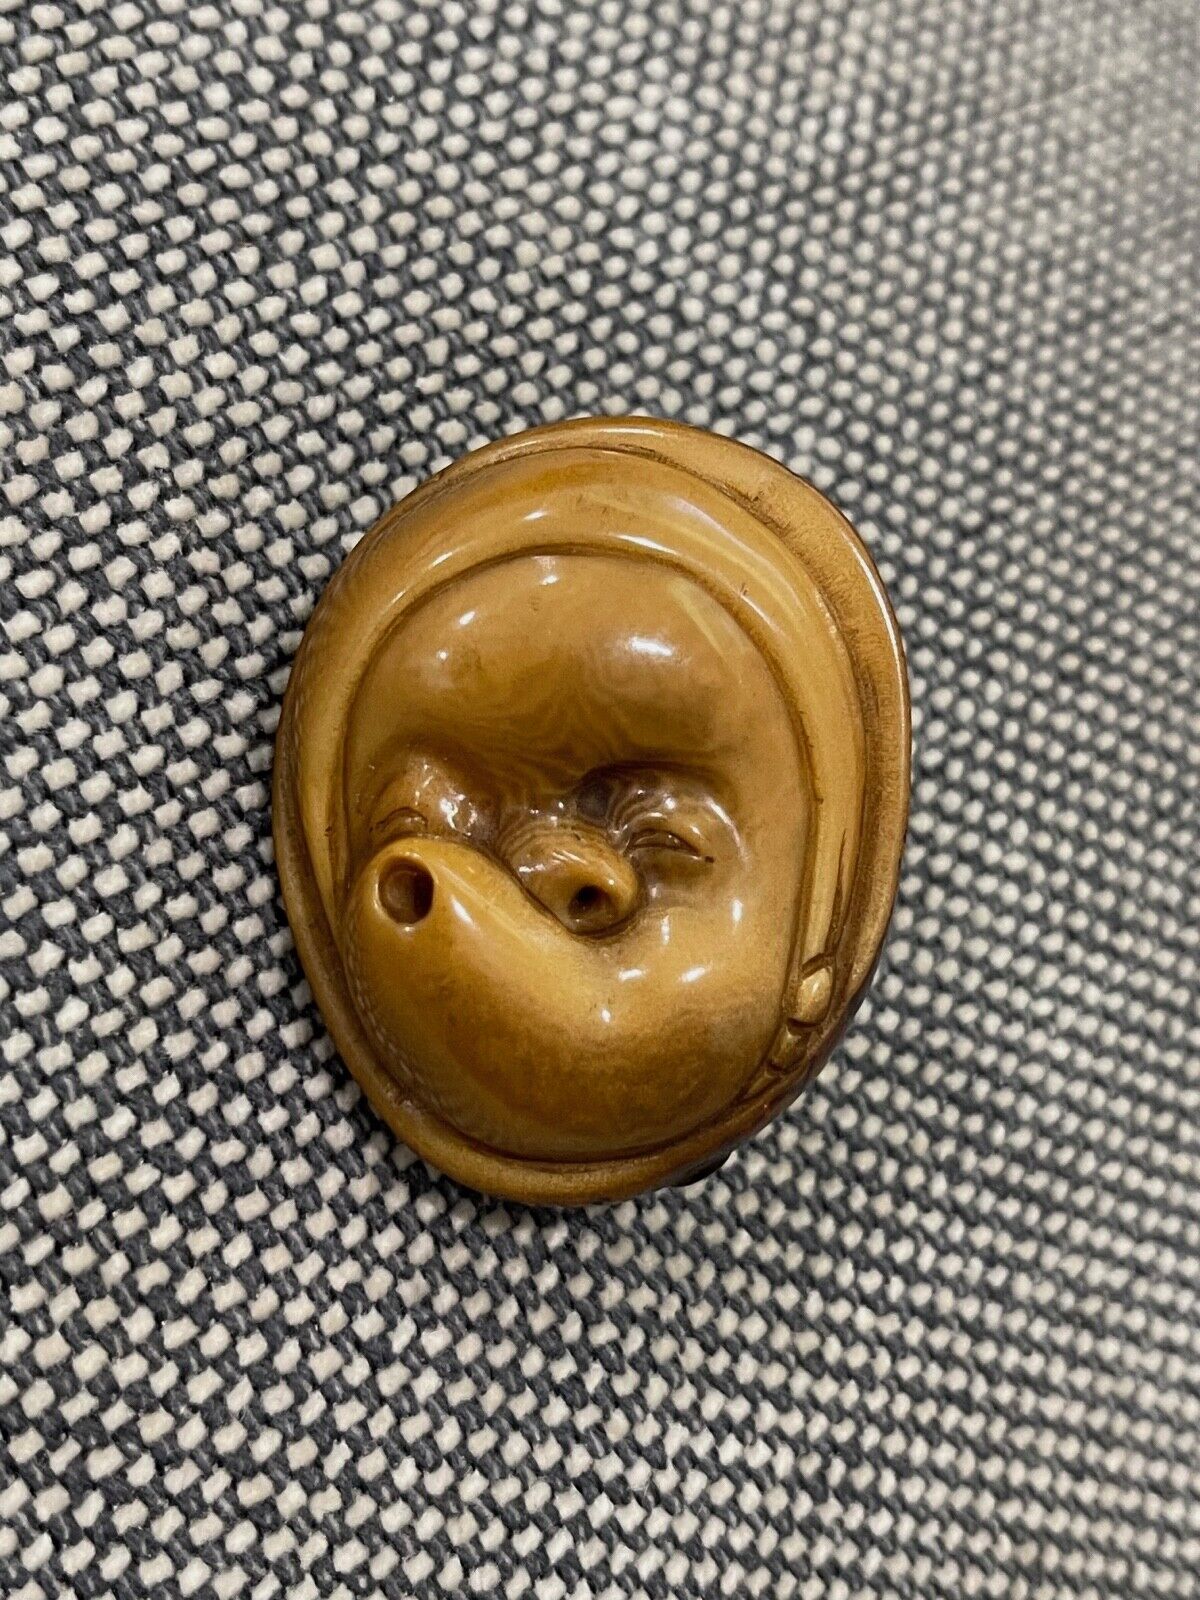 Japanese Signed Tagua Nut Carved Netsuke The Water Blower Face